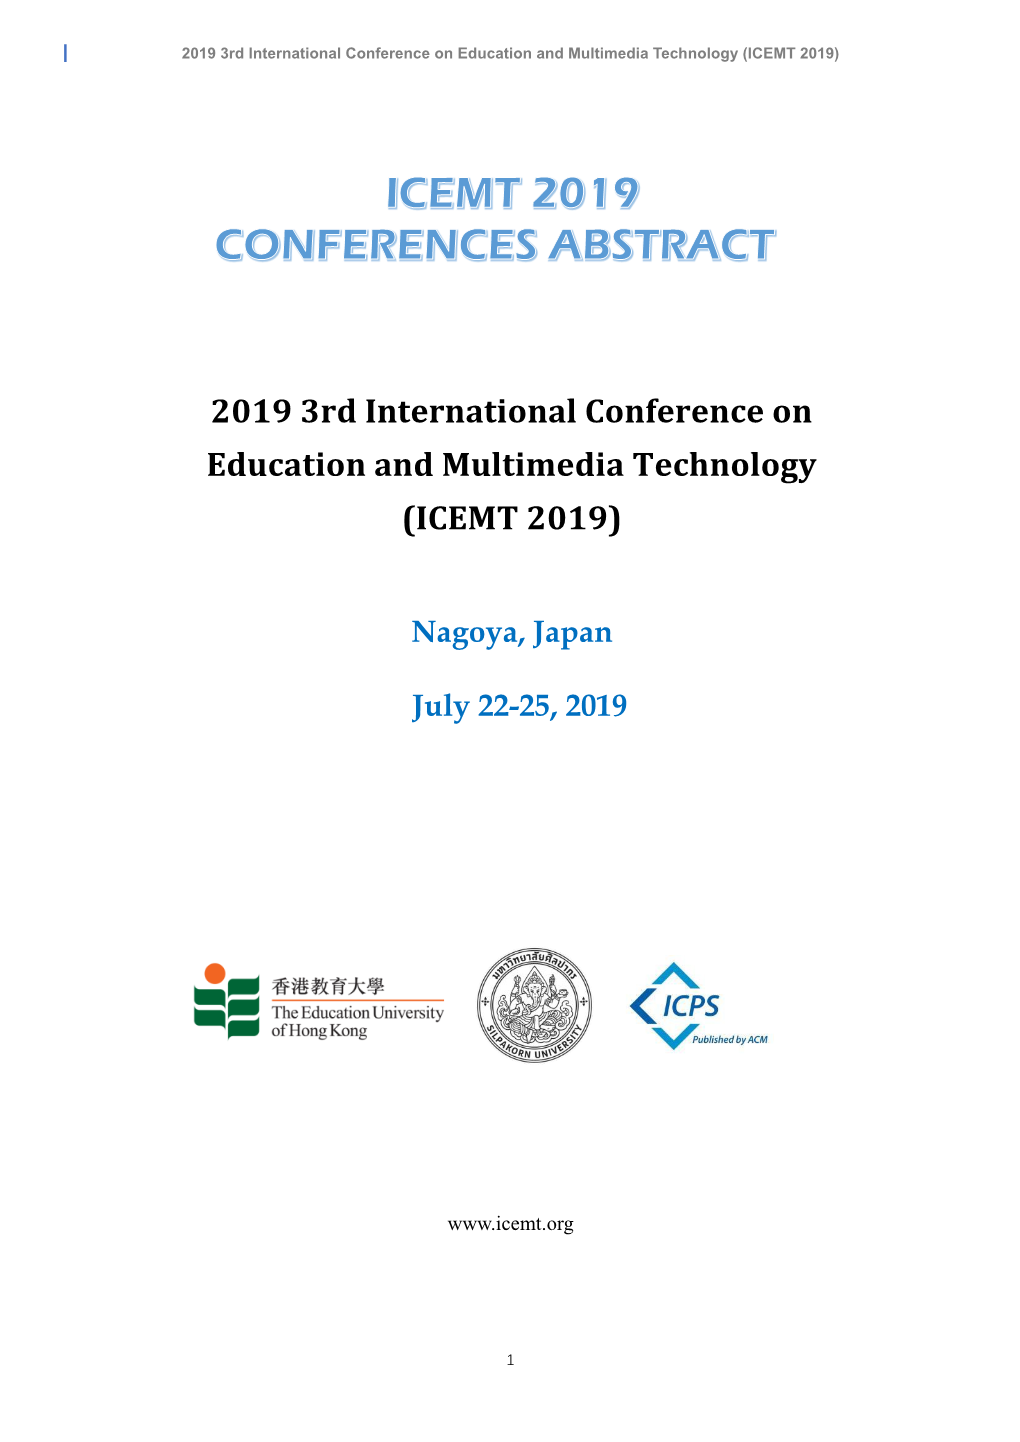 2019 3Rd International Conference on Education and Multimedia Technology (ICEMT 2019)